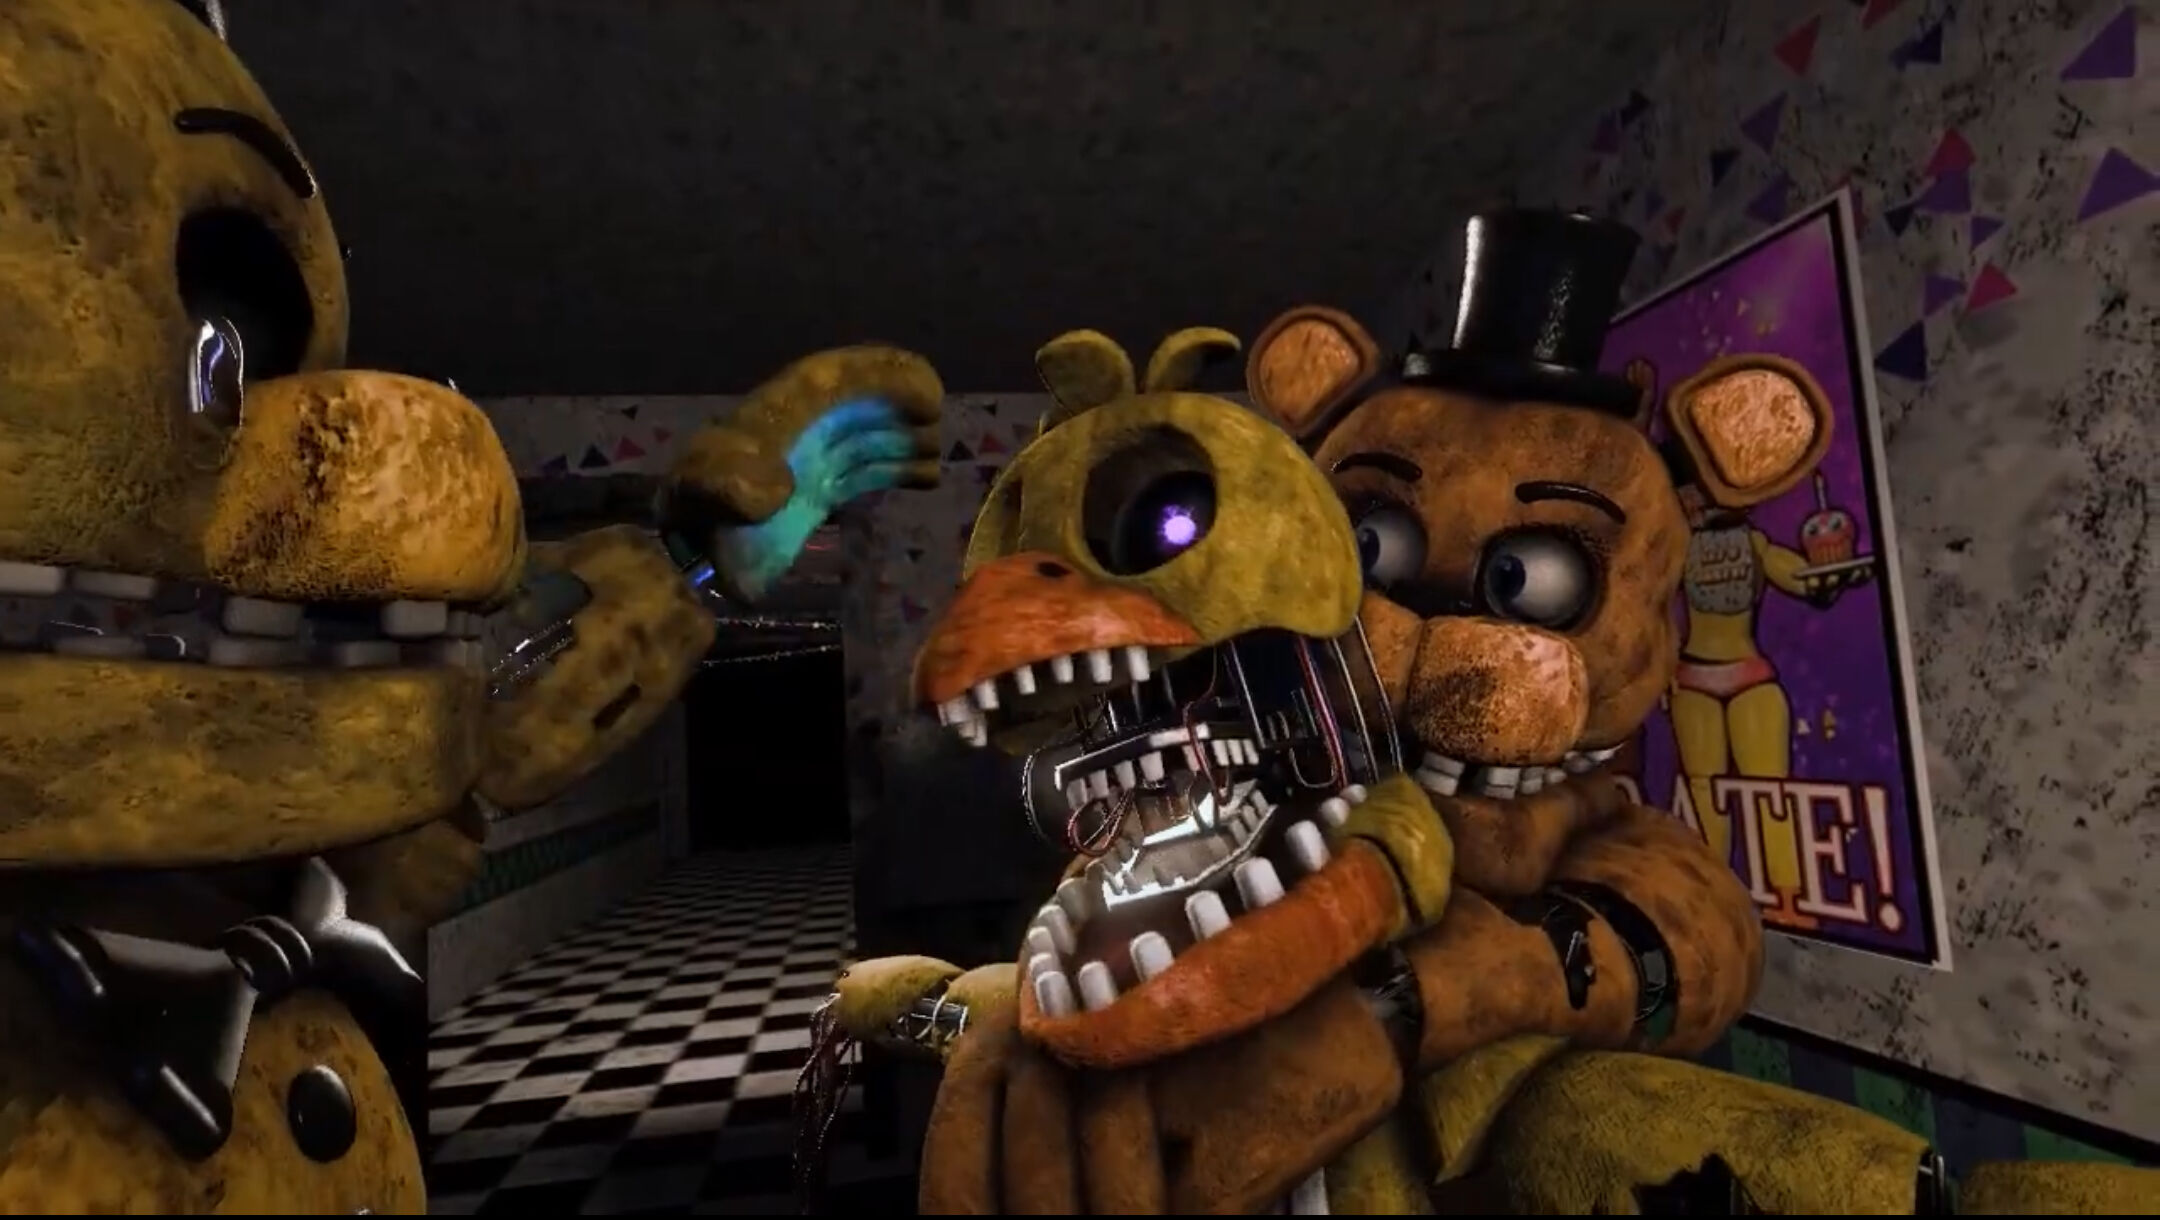 Five Nights at Fredbear's and Friends by luizfern12